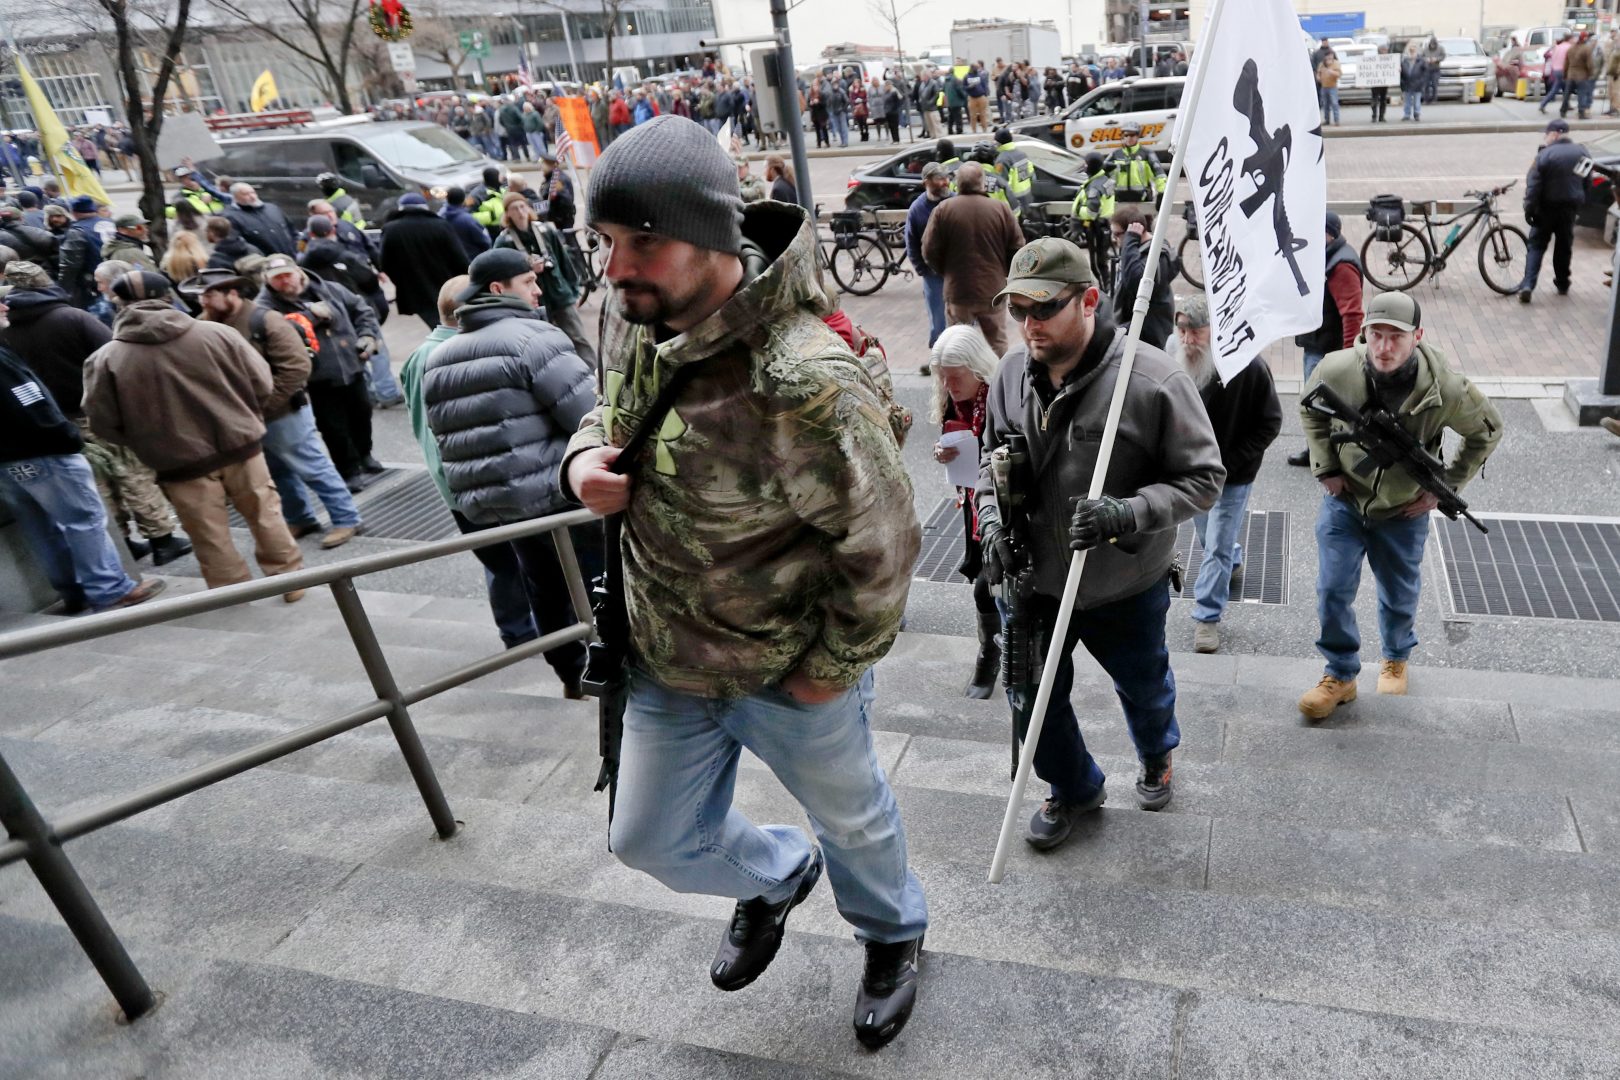 Protestors carrying rifles walk up the steps for a rally at the City County building on Monday, Jan. 7, 2019, in Pittsburgh. The protesters, many openly carrying guns, gathered in downtown Pittsburgh to rally against the city council's proposed restrictions and banning of semi-automatic rifles, certain ammunition and firearms accessories within city limits. 